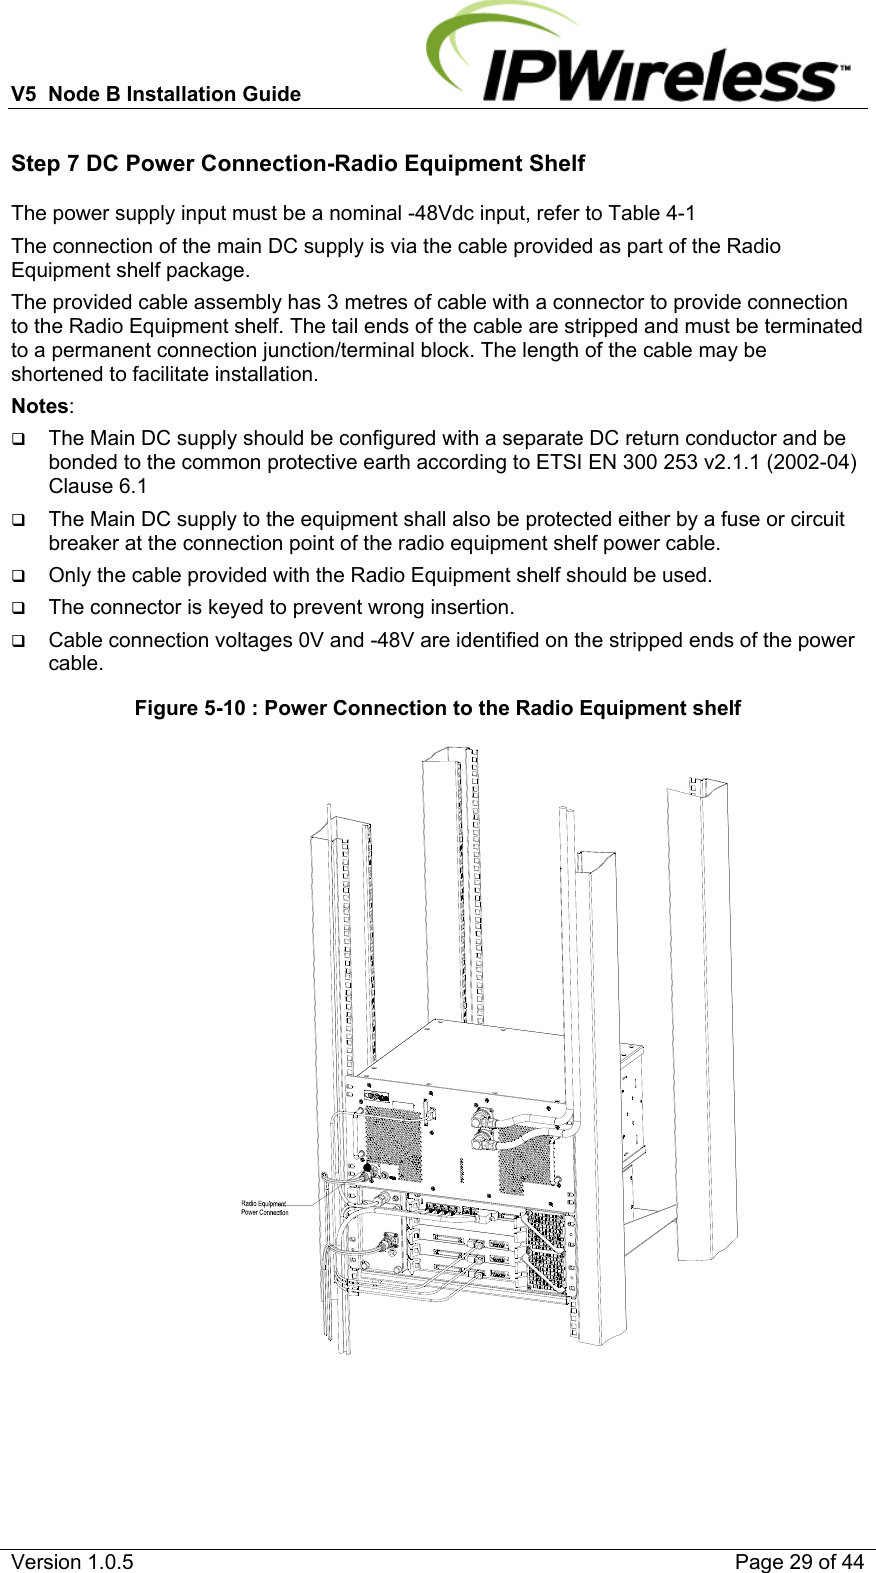 V5  Node B Installation Guide                           Version 1.0.5    Page 29 of 44 Step 7 DC Power Connection-Radio Equipment Shelf The power supply input must be a nominal -48Vdc input, refer to Table 4-1 The connection of the main DC supply is via the cable provided as part of the Radio Equipment shelf package. The provided cable assembly has 3 metres of cable with a connector to provide connection to the Radio Equipment shelf. The tail ends of the cable are stripped and must be terminated to a permanent connection junction/terminal block. The length of the cable may be shortened to facilitate installation. Notes:   The Main DC supply should be configured with a separate DC return conductor and be bonded to the common protective earth according to ETSI EN 300 253 v2.1.1 (2002-04) Clause 6.1  The Main DC supply to the equipment shall also be protected either by a fuse or circuit breaker at the connection point of the radio equipment shelf power cable.  Only the cable provided with the Radio Equipment shelf should be used.  The connector is keyed to prevent wrong insertion.  Cable connection voltages 0V and -48V are identified on the stripped ends of the power cable. Figure 5-10 : Power Connection to the Radio Equipment shelf                                                                   